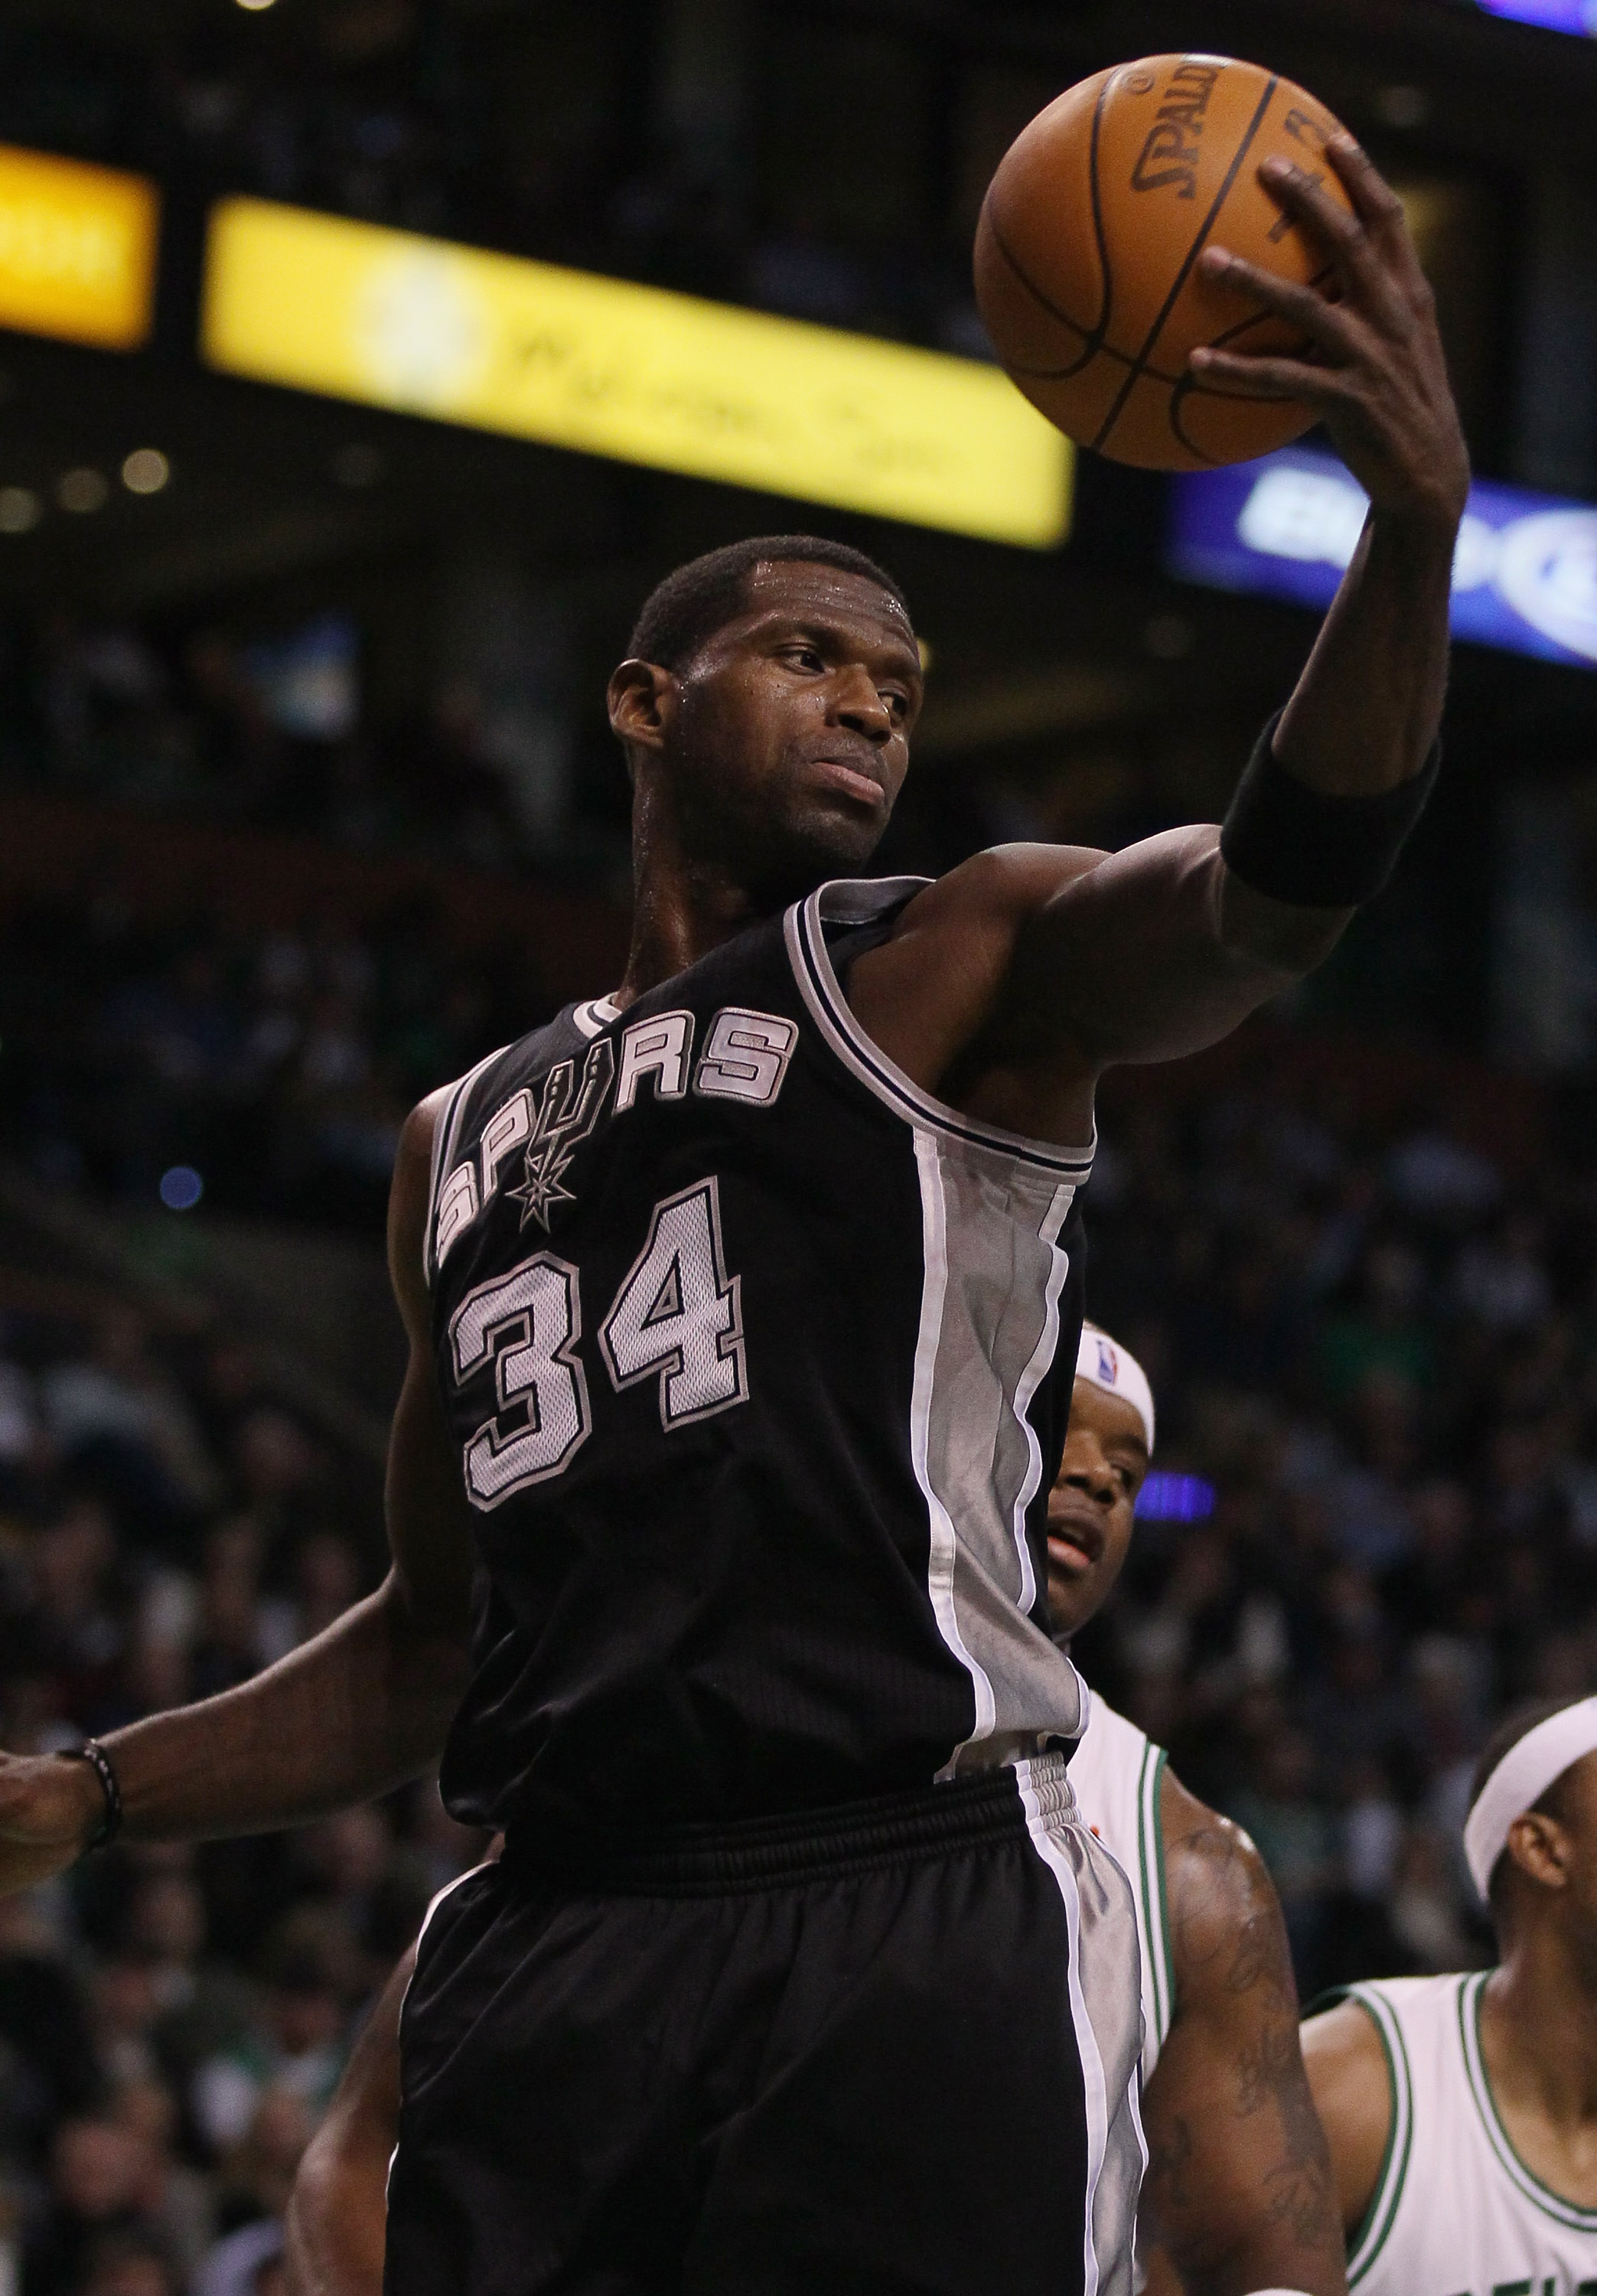 BOSTON, MA - JANUARY 05:  Antonio McDyess #34 of the San Antonio Spurs grabs the rebound in the first half against the Boston Celtics on January 5, 2011 at the TD Garden in Boston, Massachusetts. NOTE TO USER: User expressly acknowledges and agrees that,